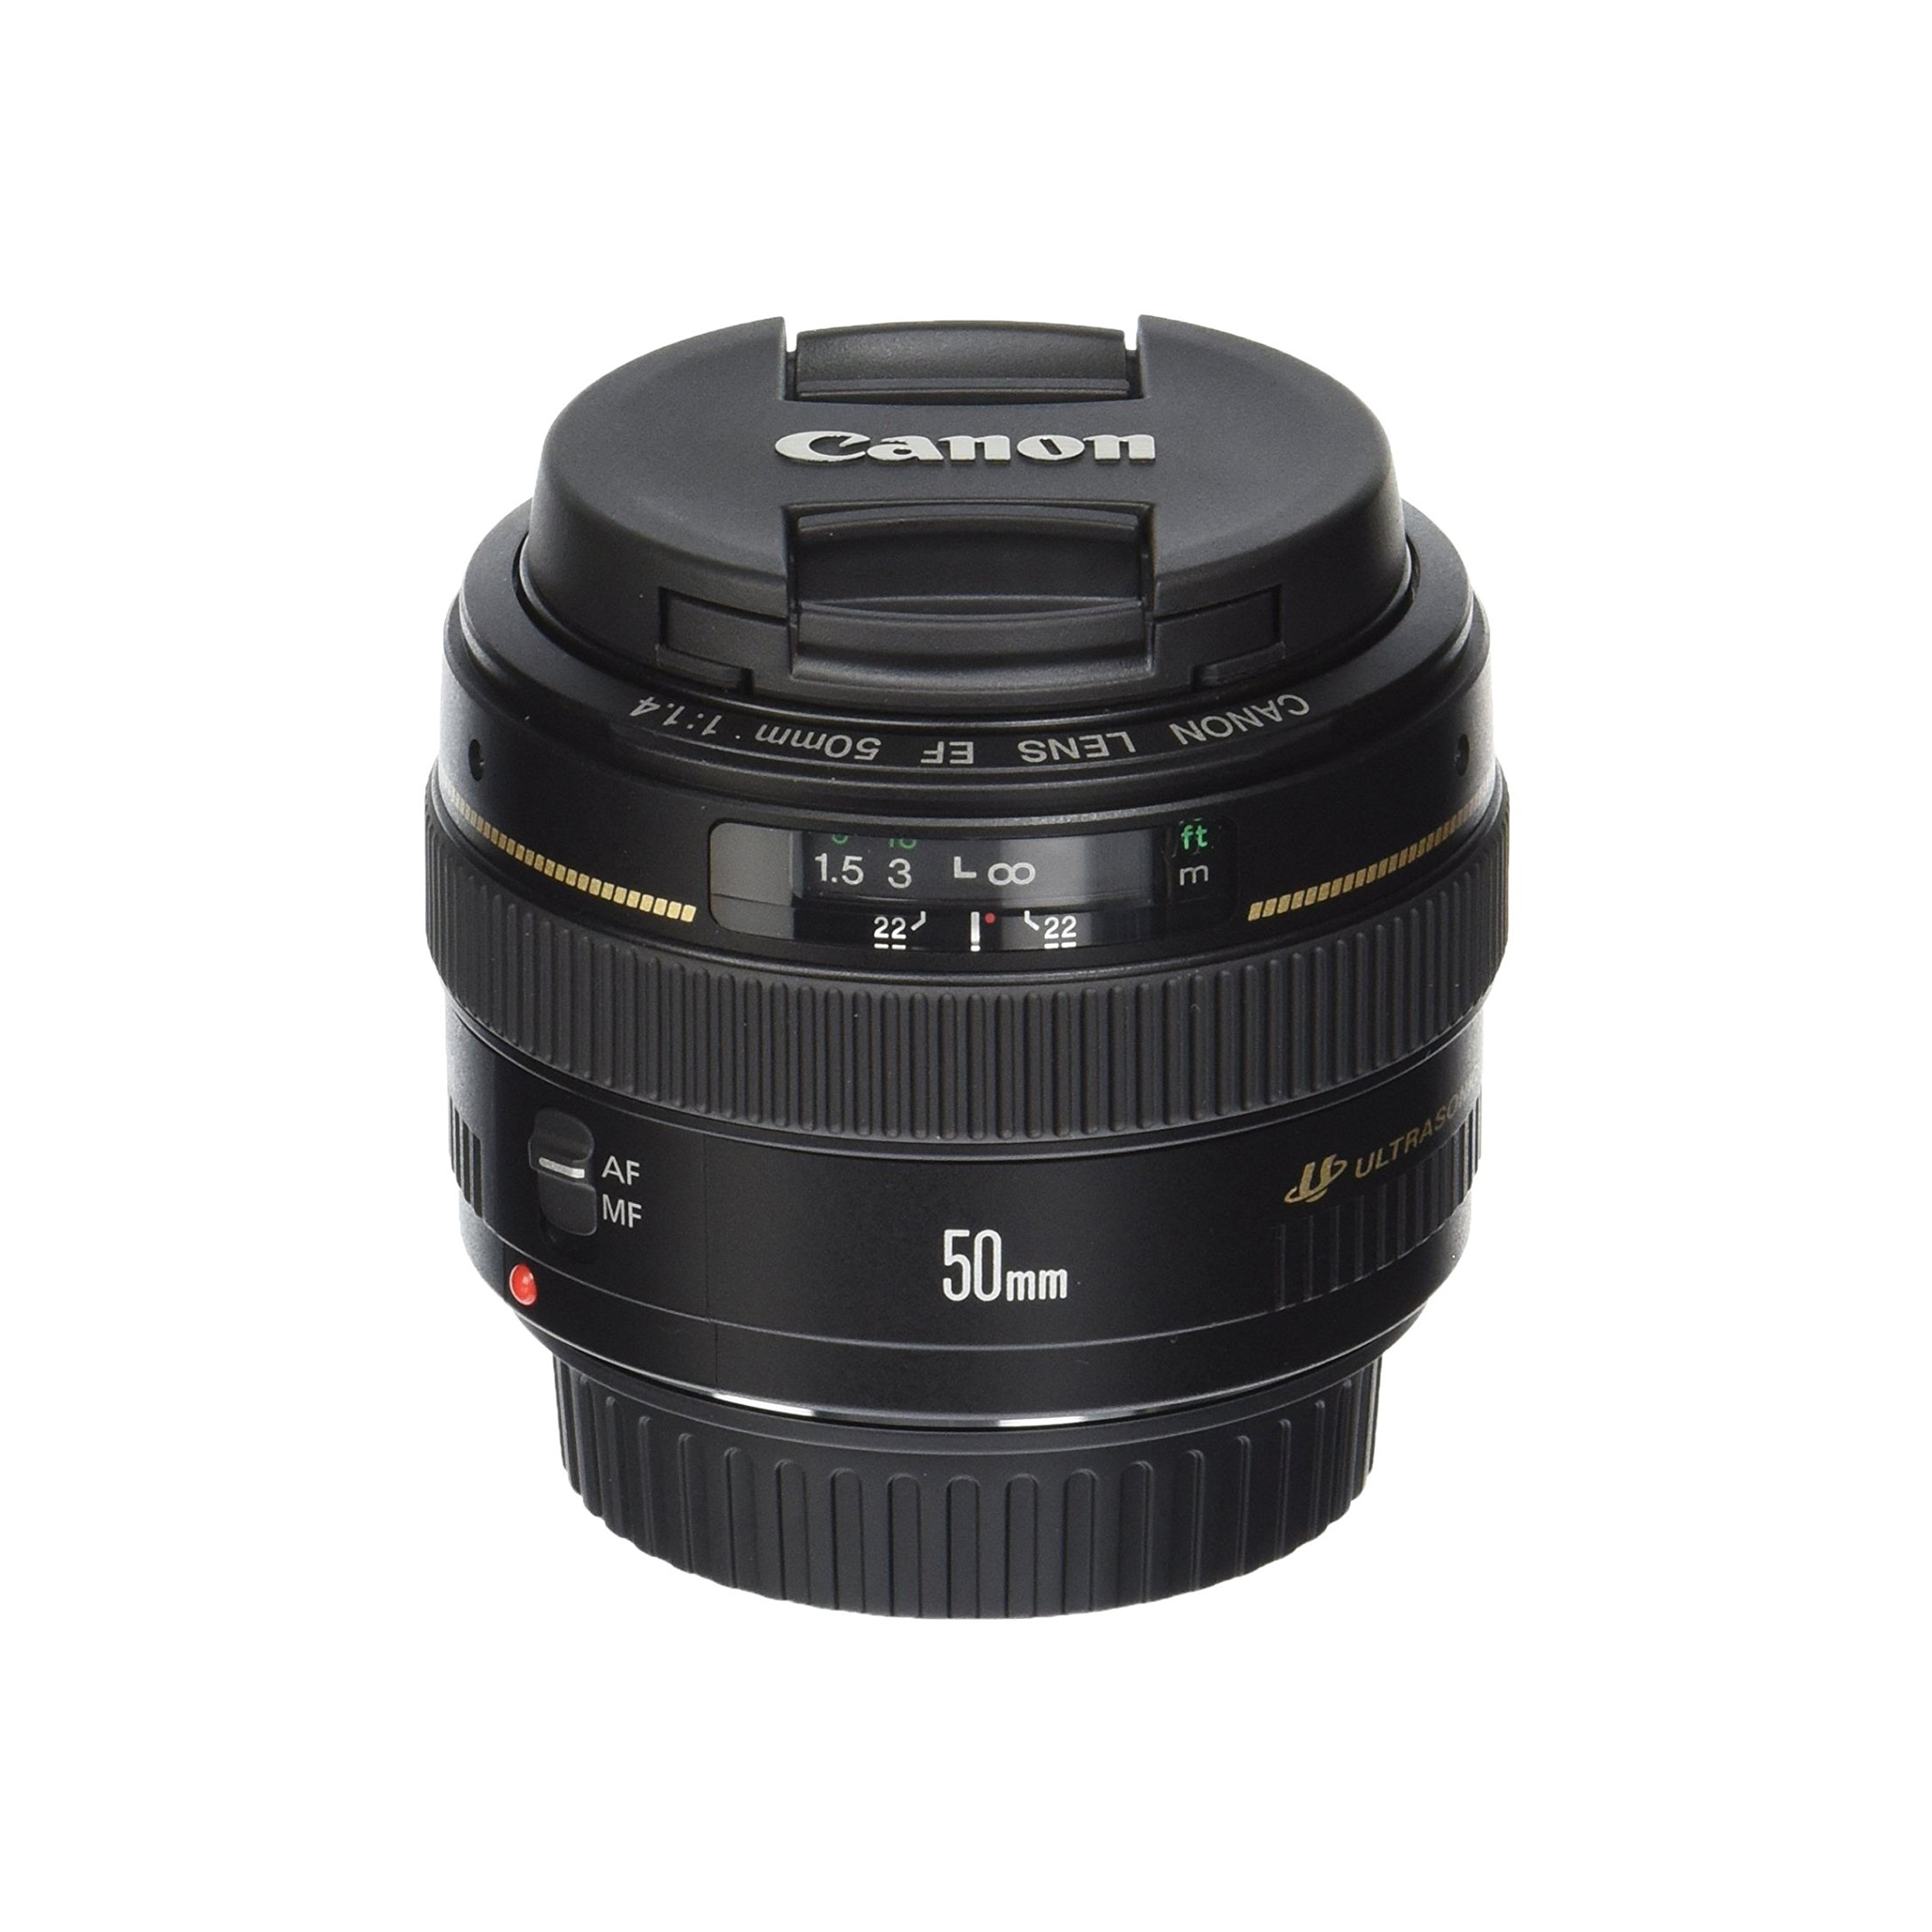 Objectif Canon 50mm f1.4